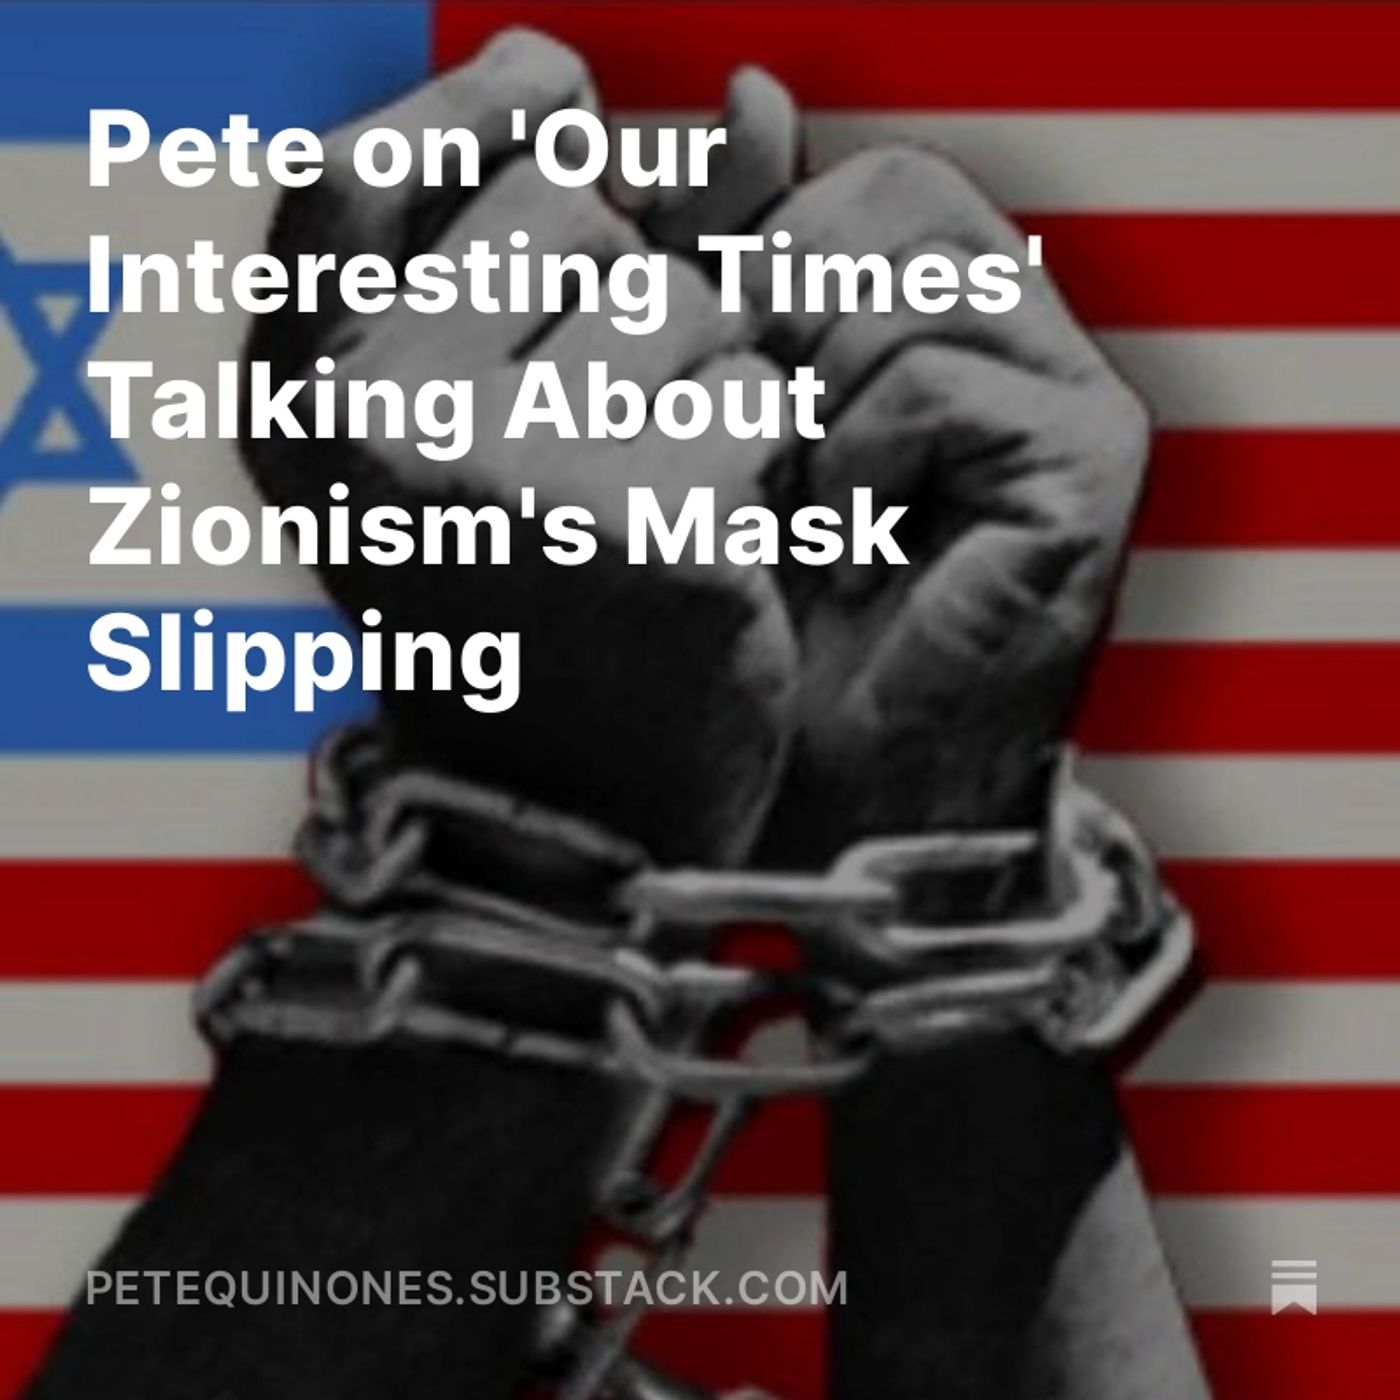 Pete on 'Our Interesting Times' Talking About Zionism's Mask Slipping